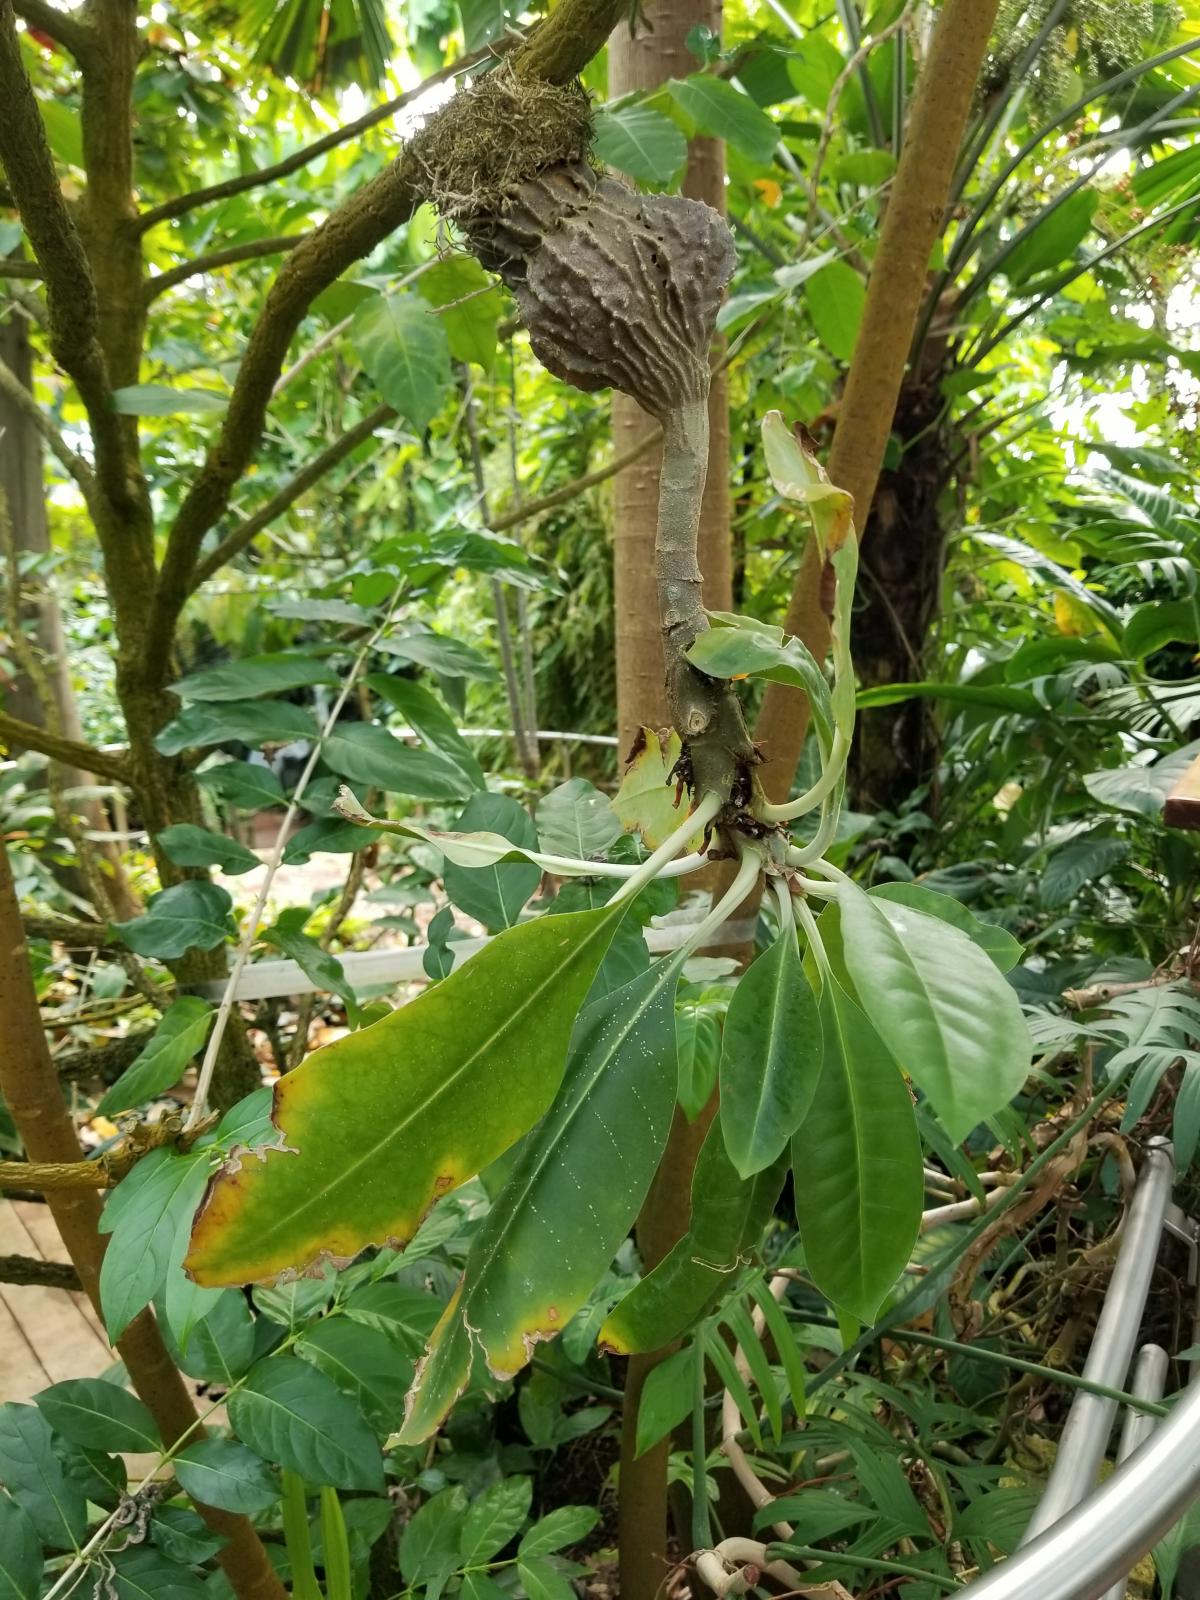 Plant with its roots attached to a branch. The plant is growing downward.